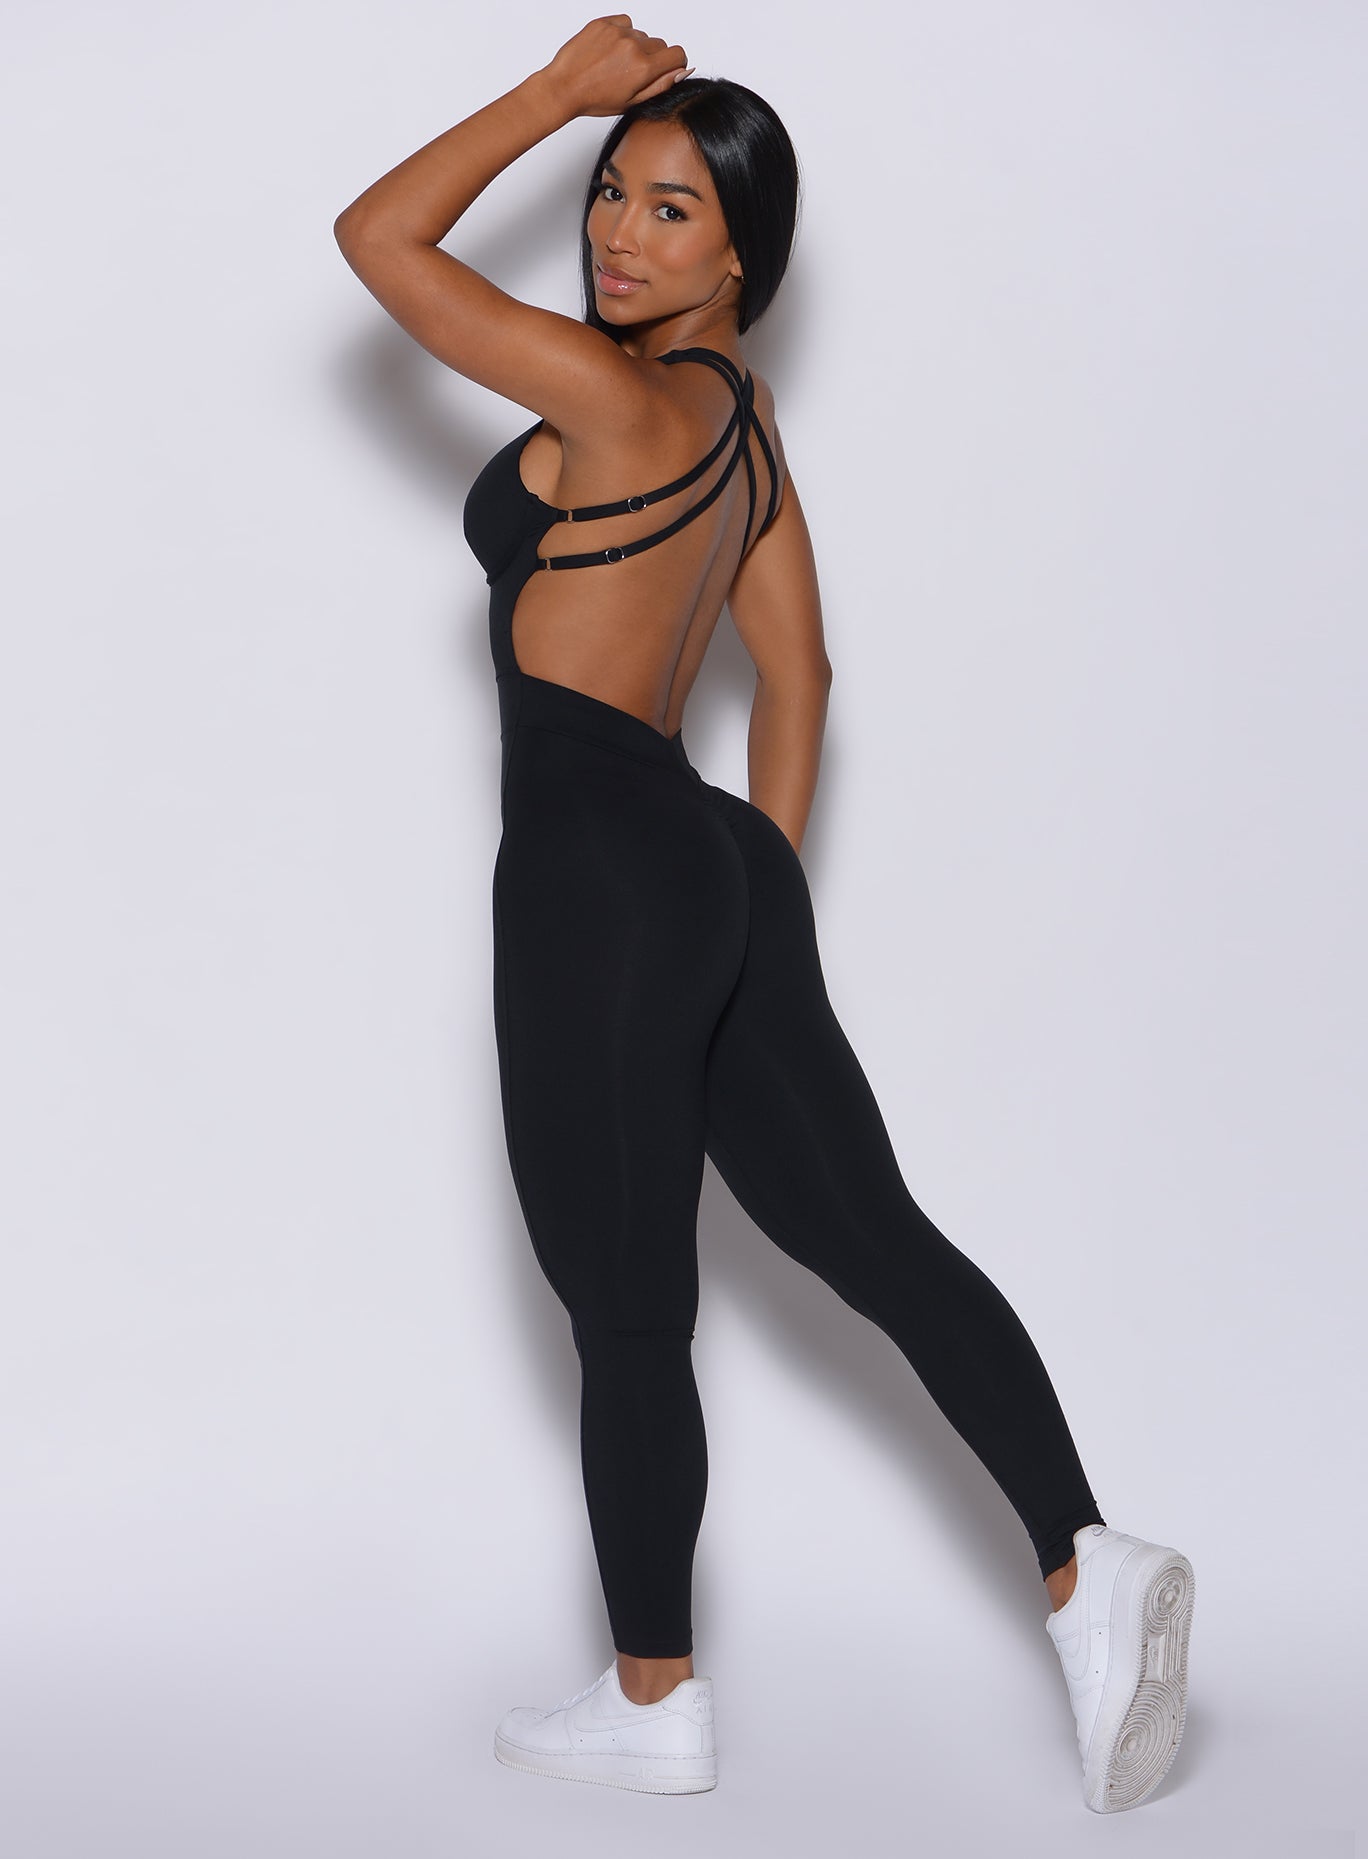 Left side profile view of a model wearing our black Bombshell Bodysuit